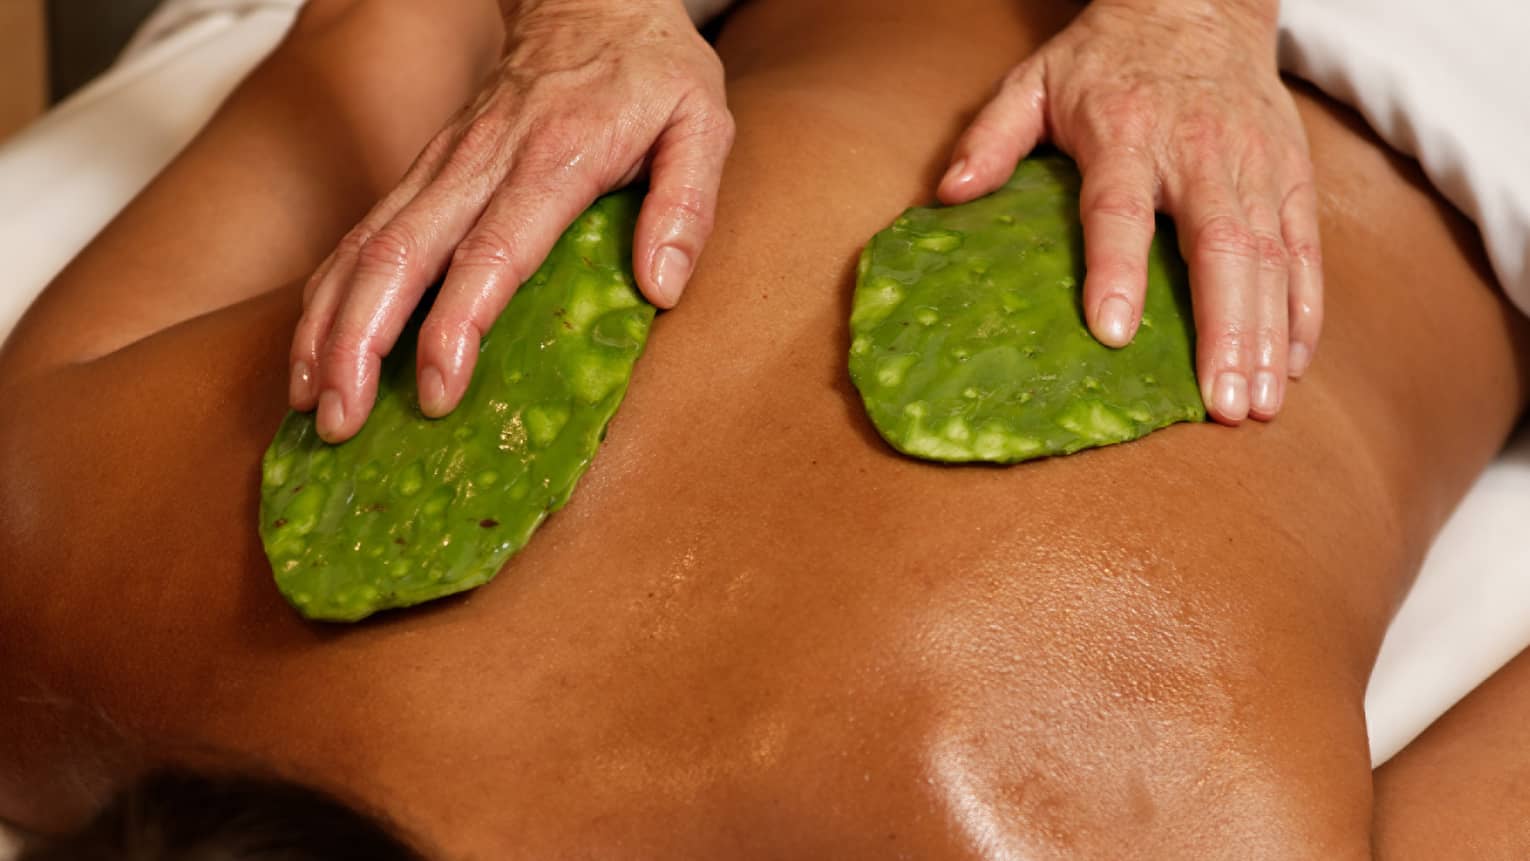 A woman receiving a massage using large leaves.